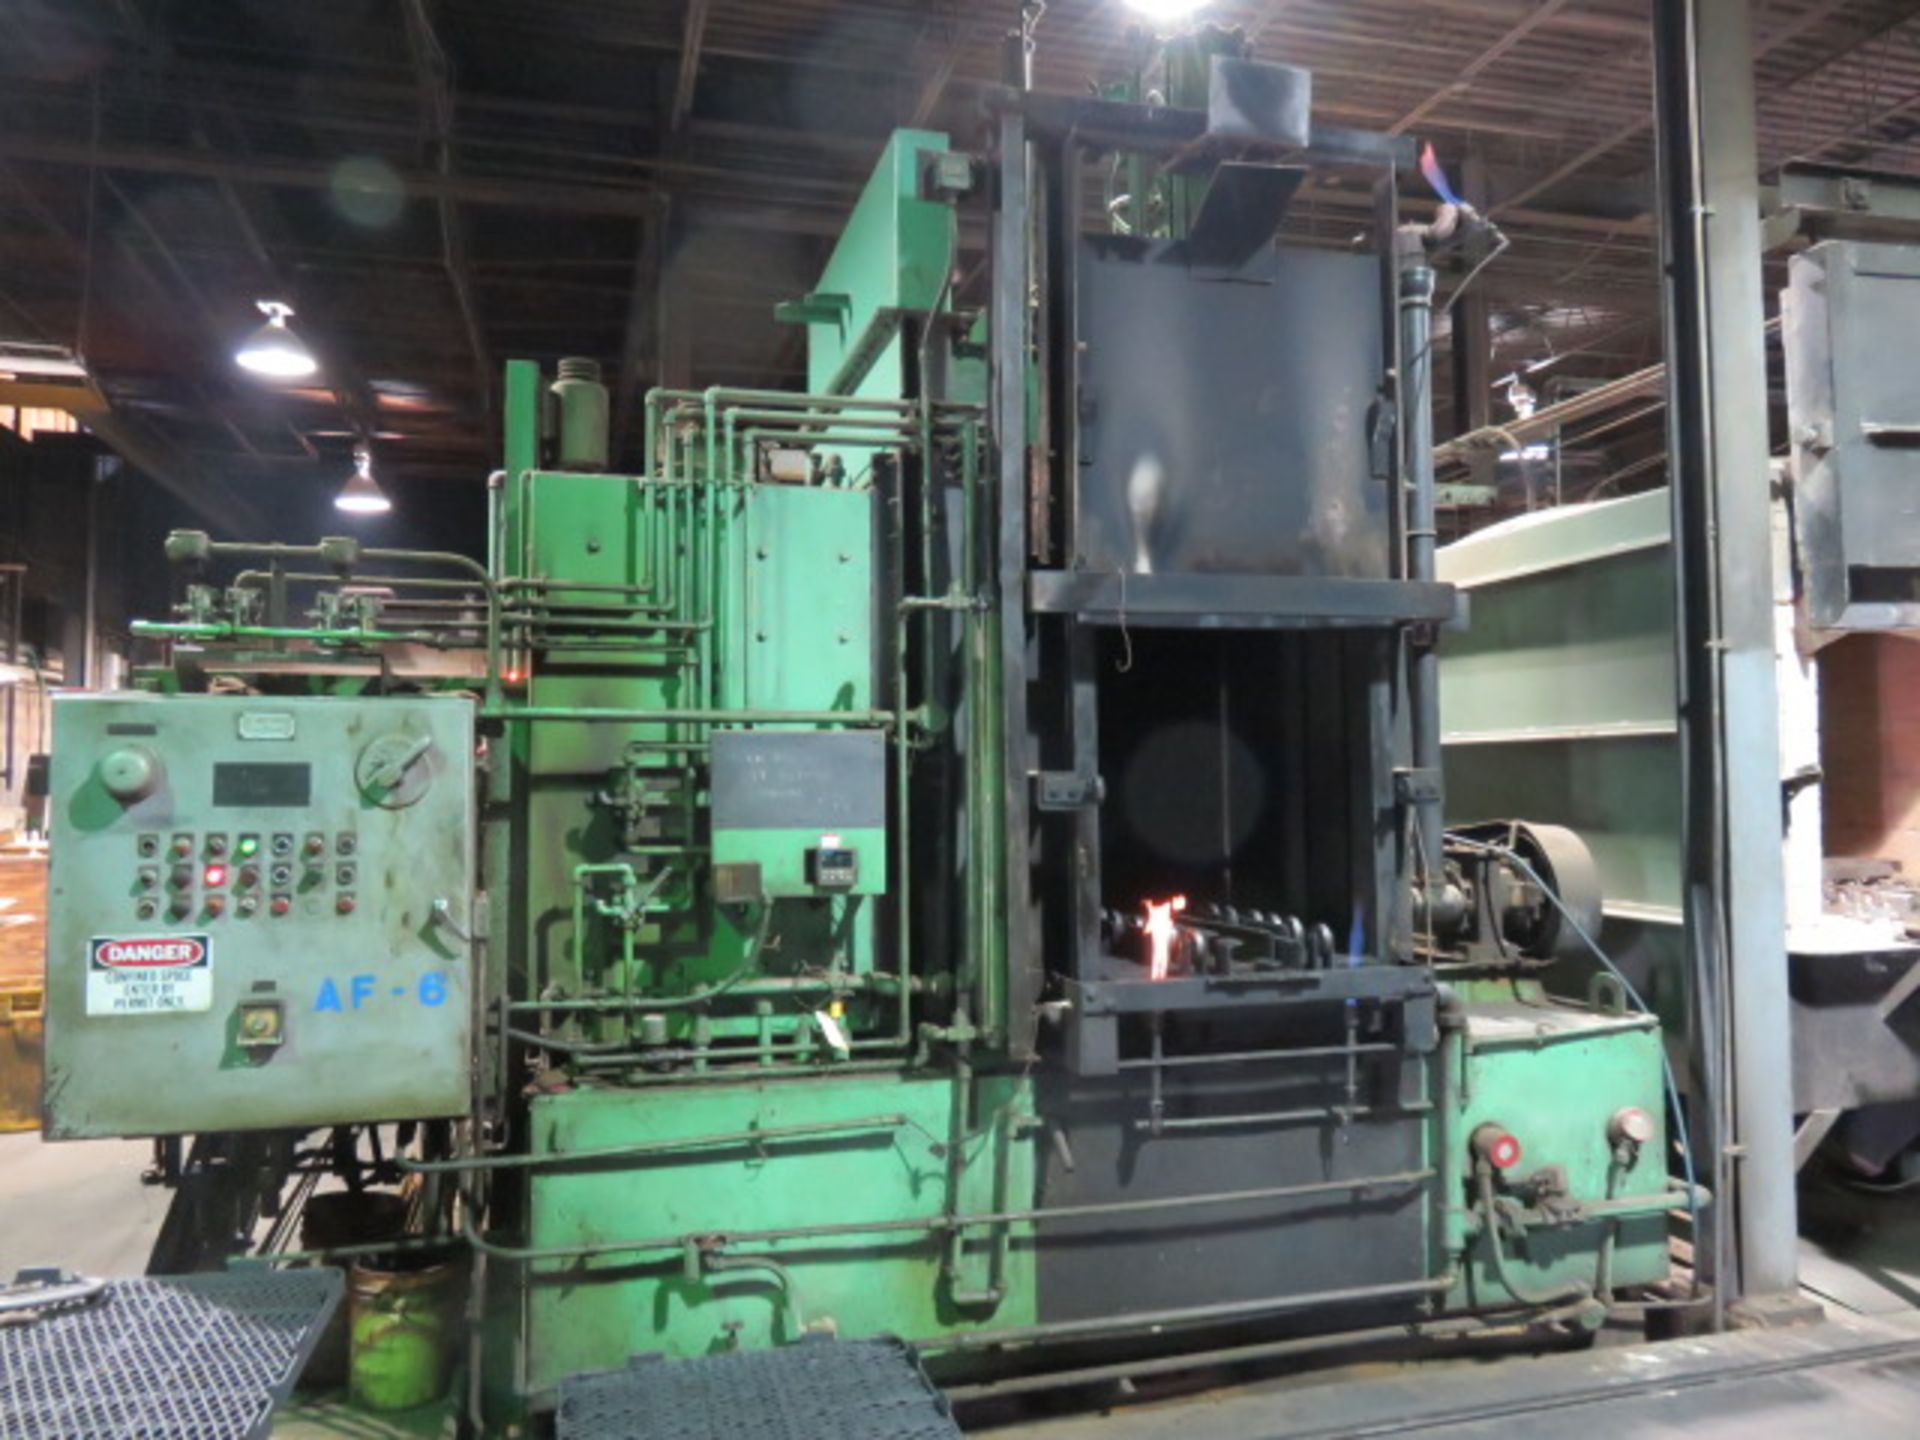 SURFACE COMBUSTION Power Convection AllCase Controlled Atmosphere Furnace, S/N BC 38473-1... - Image 2 of 20